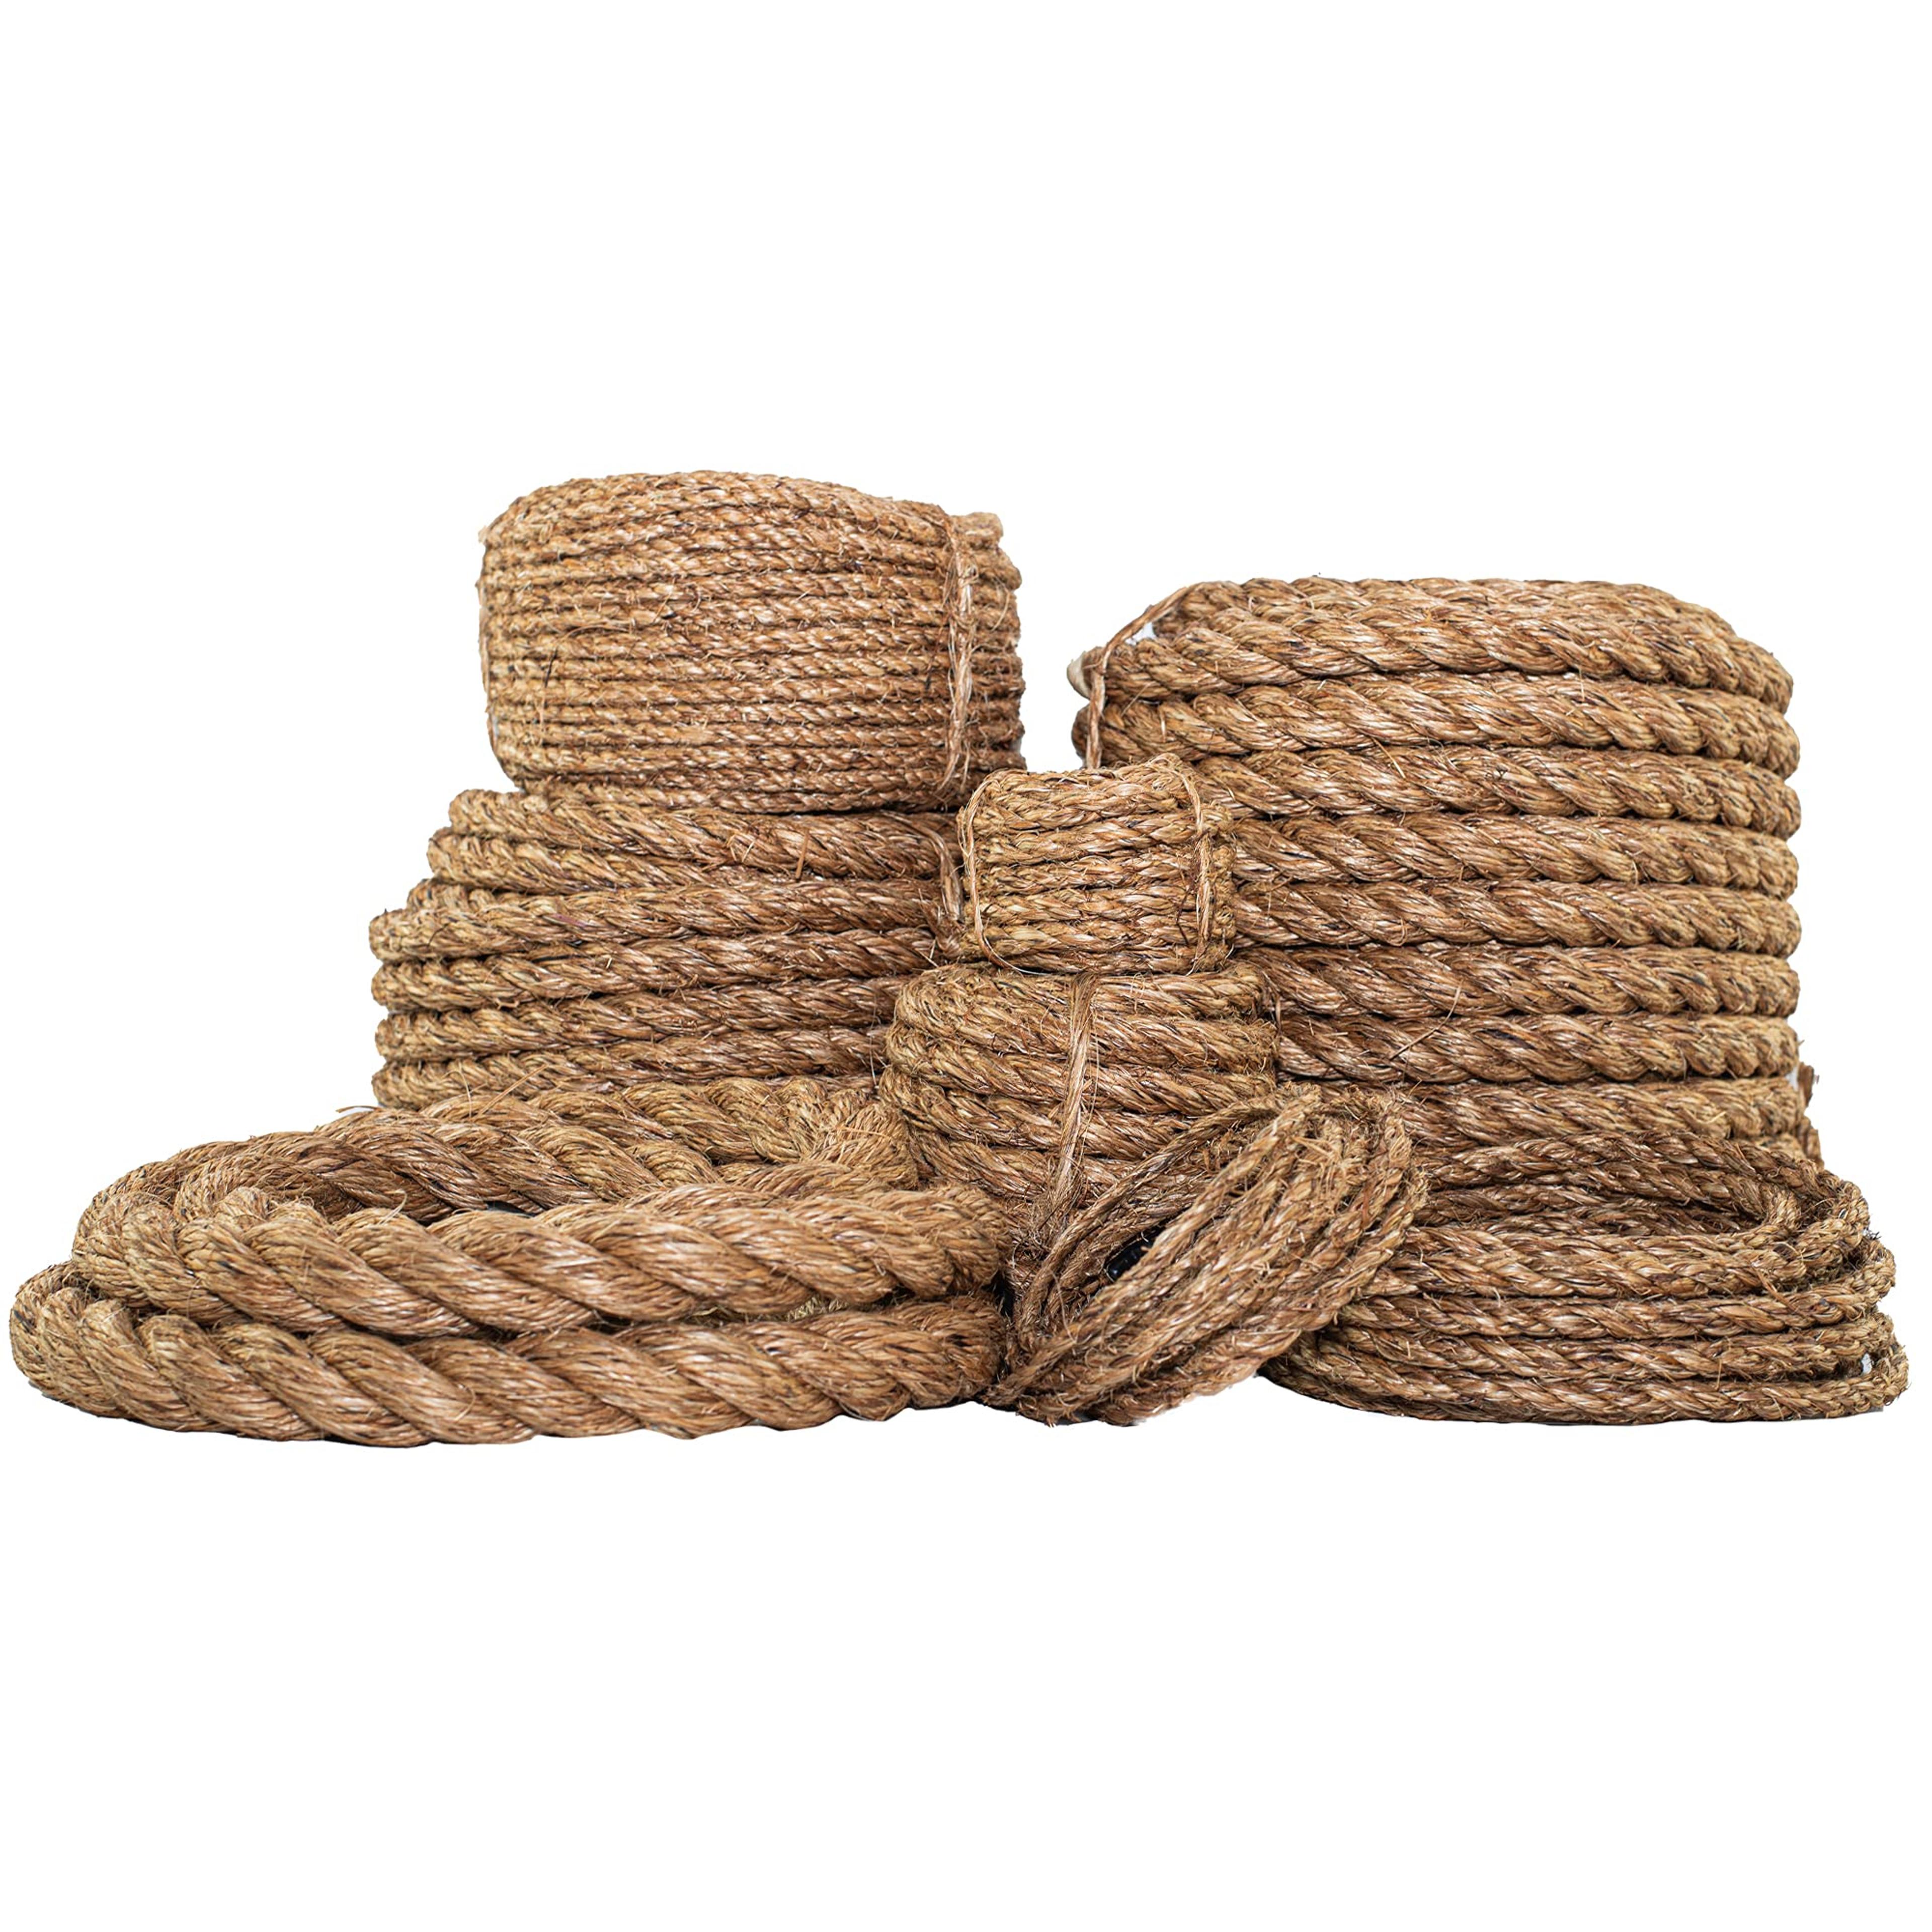 SGT KNOTS Twisted Manila Rope - Natural 3 Strand Fiber Hemp Rope for Indoor and Outdoor Use | Multipurpose Manila Rope for Crafts, DIY Projects, Home Decorating, Climbing | 3/4 in x 50 ft - - Amazon.com